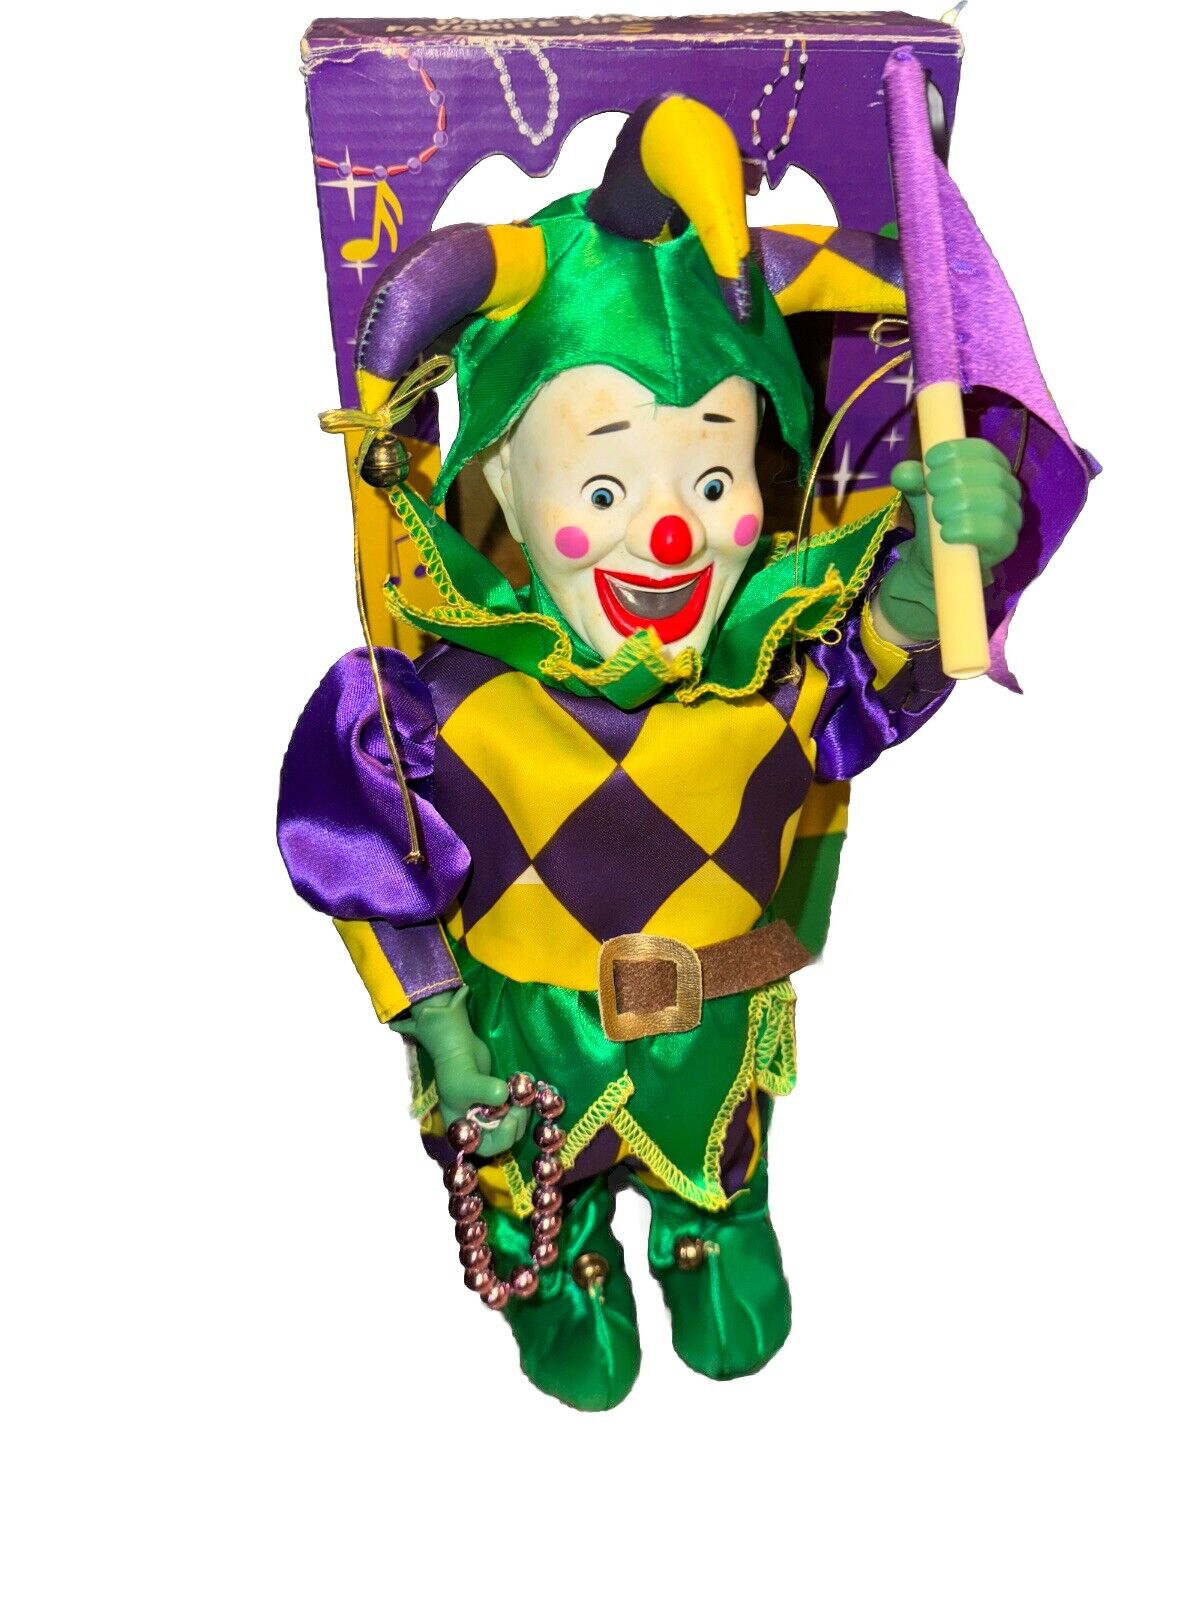 Vintage Realistic Animation Jester Plays Mardi Gras Music In Beautiful Costume